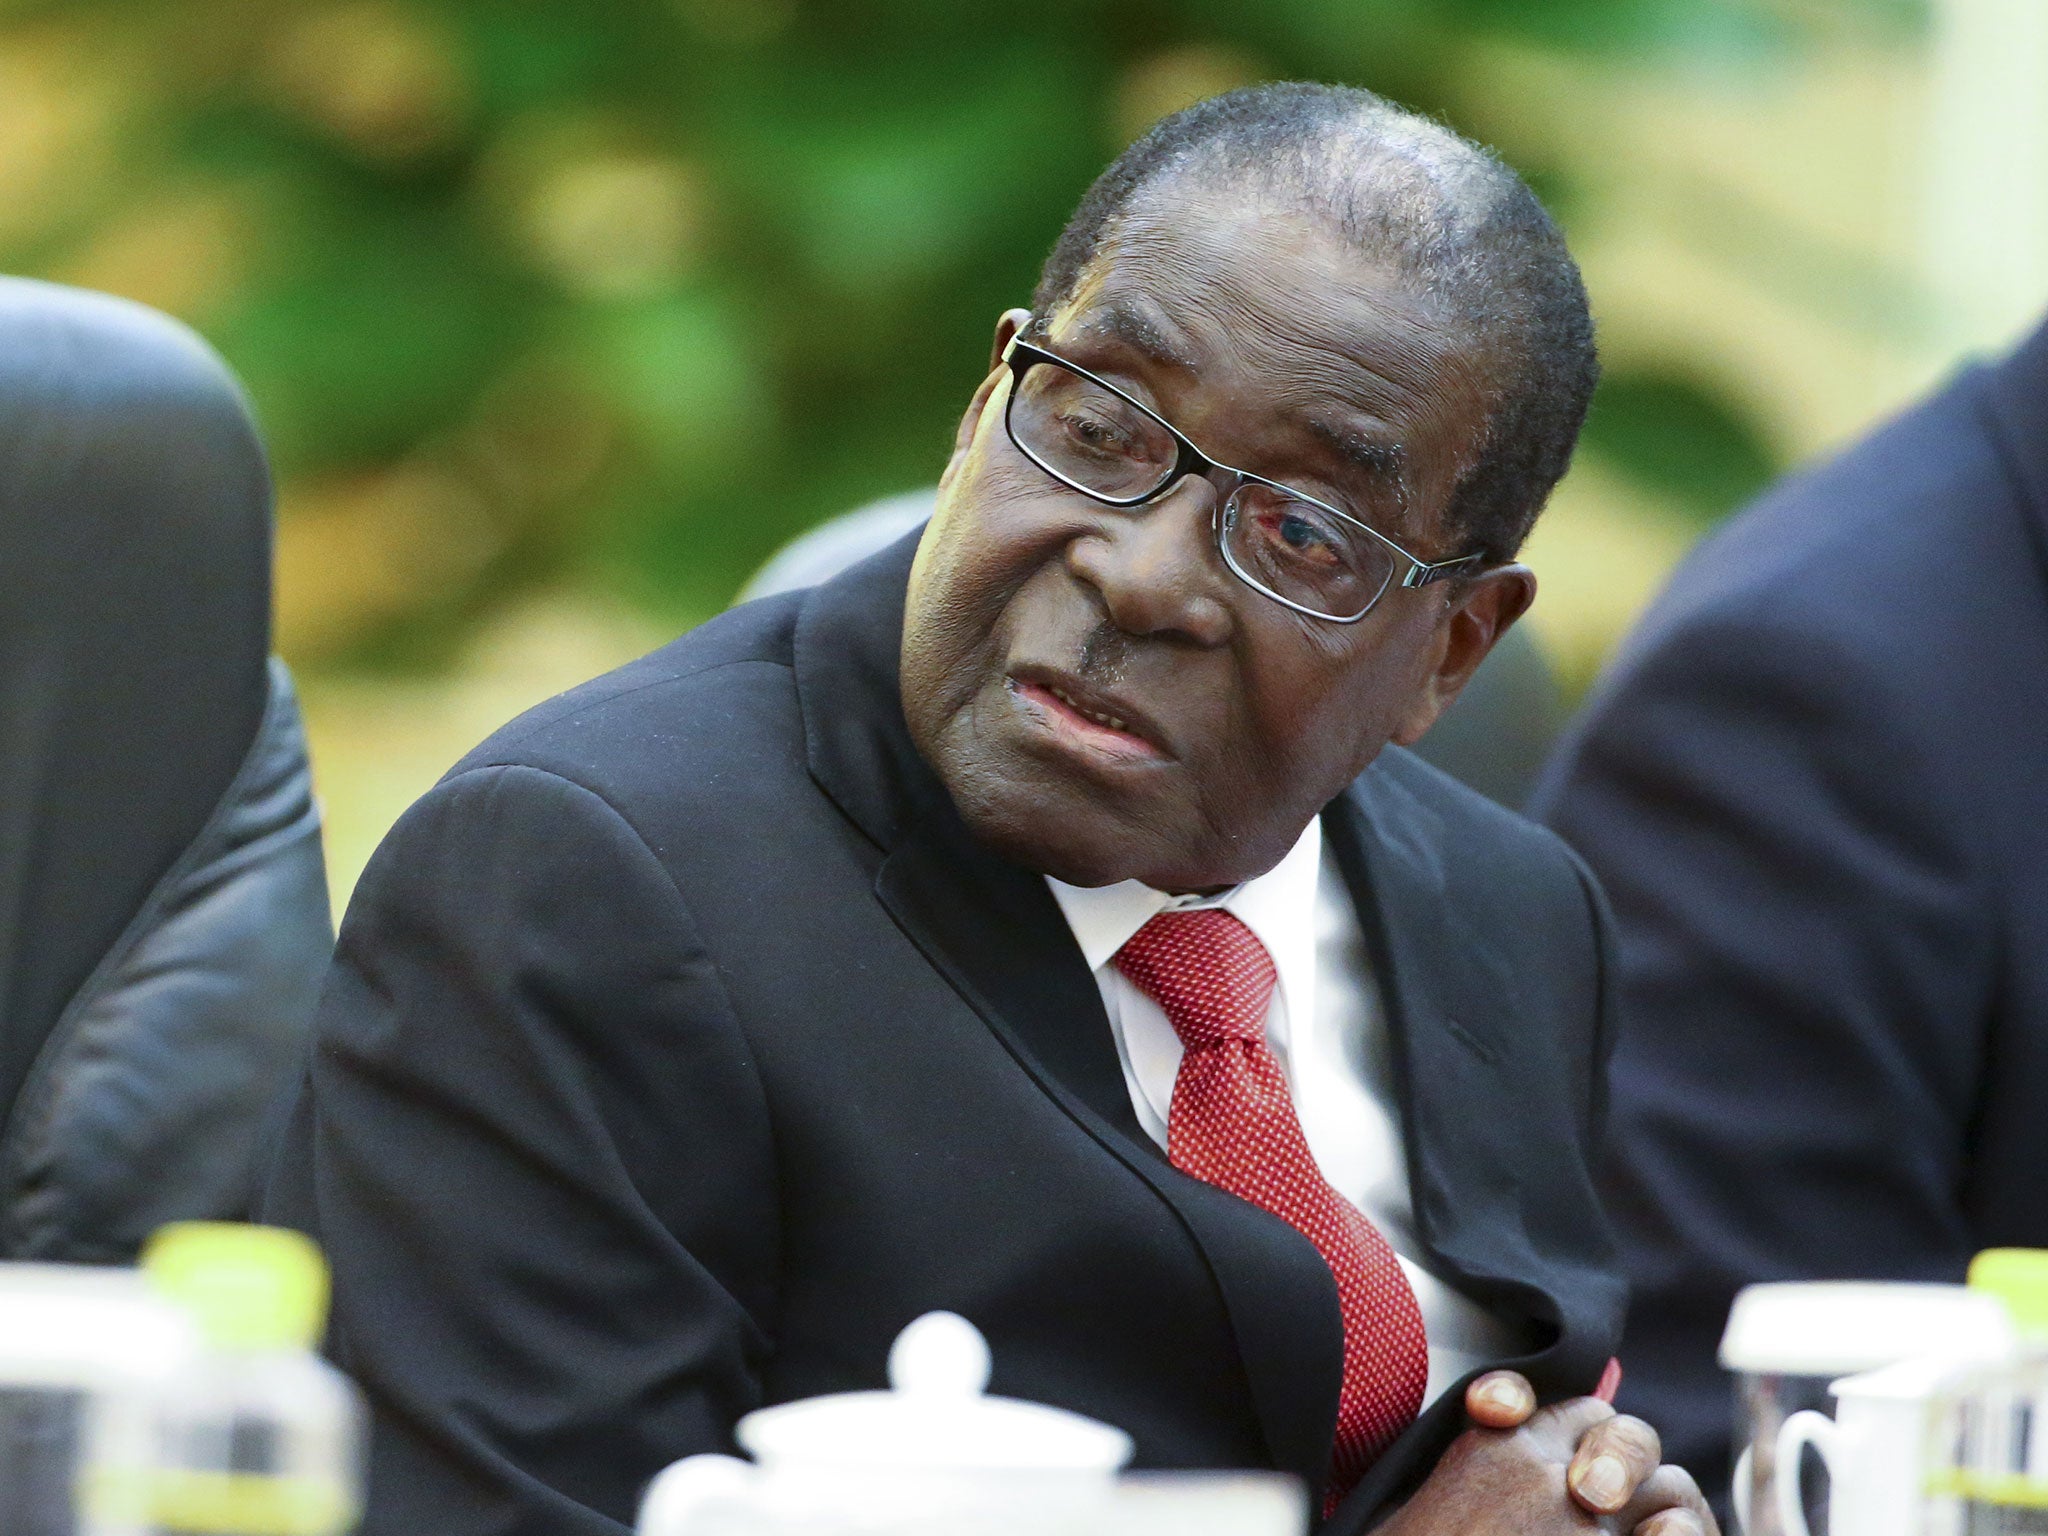 Robert Mugabe is the only President the country has ever known